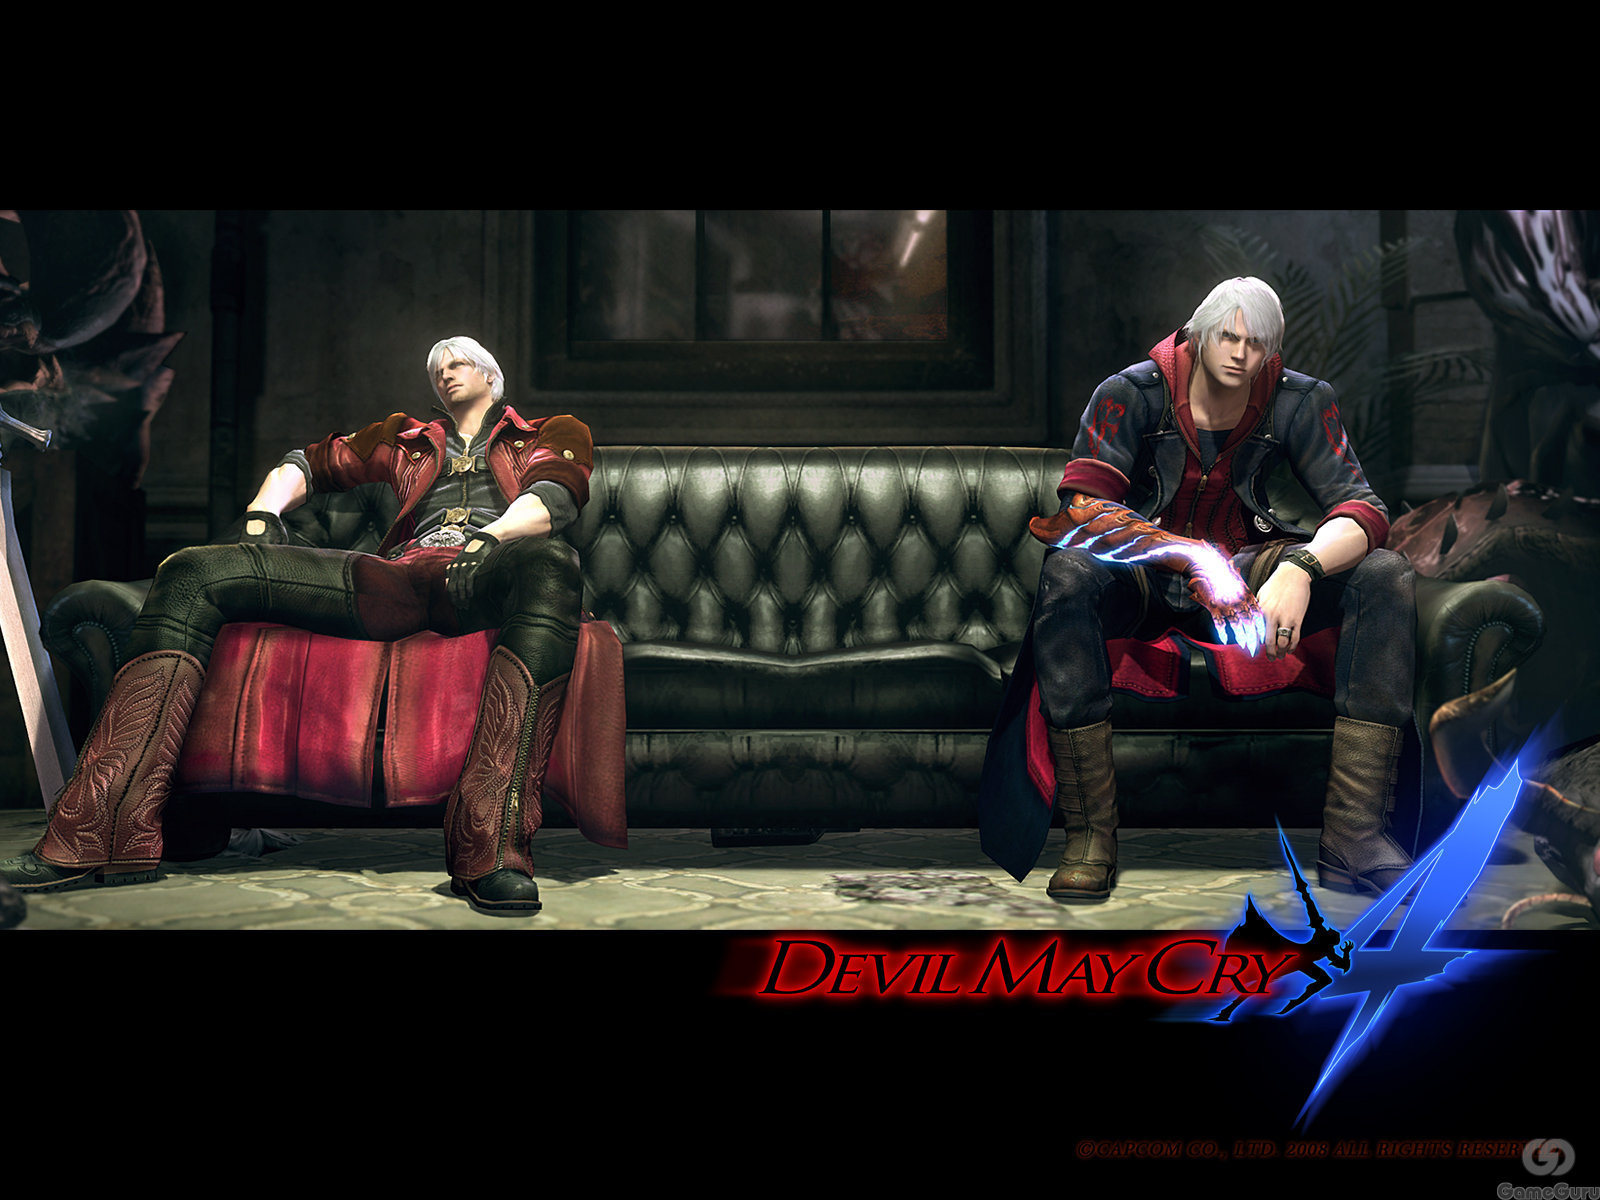 18019 download wallpaper games, devil may cry, black screensavers and pictures for free